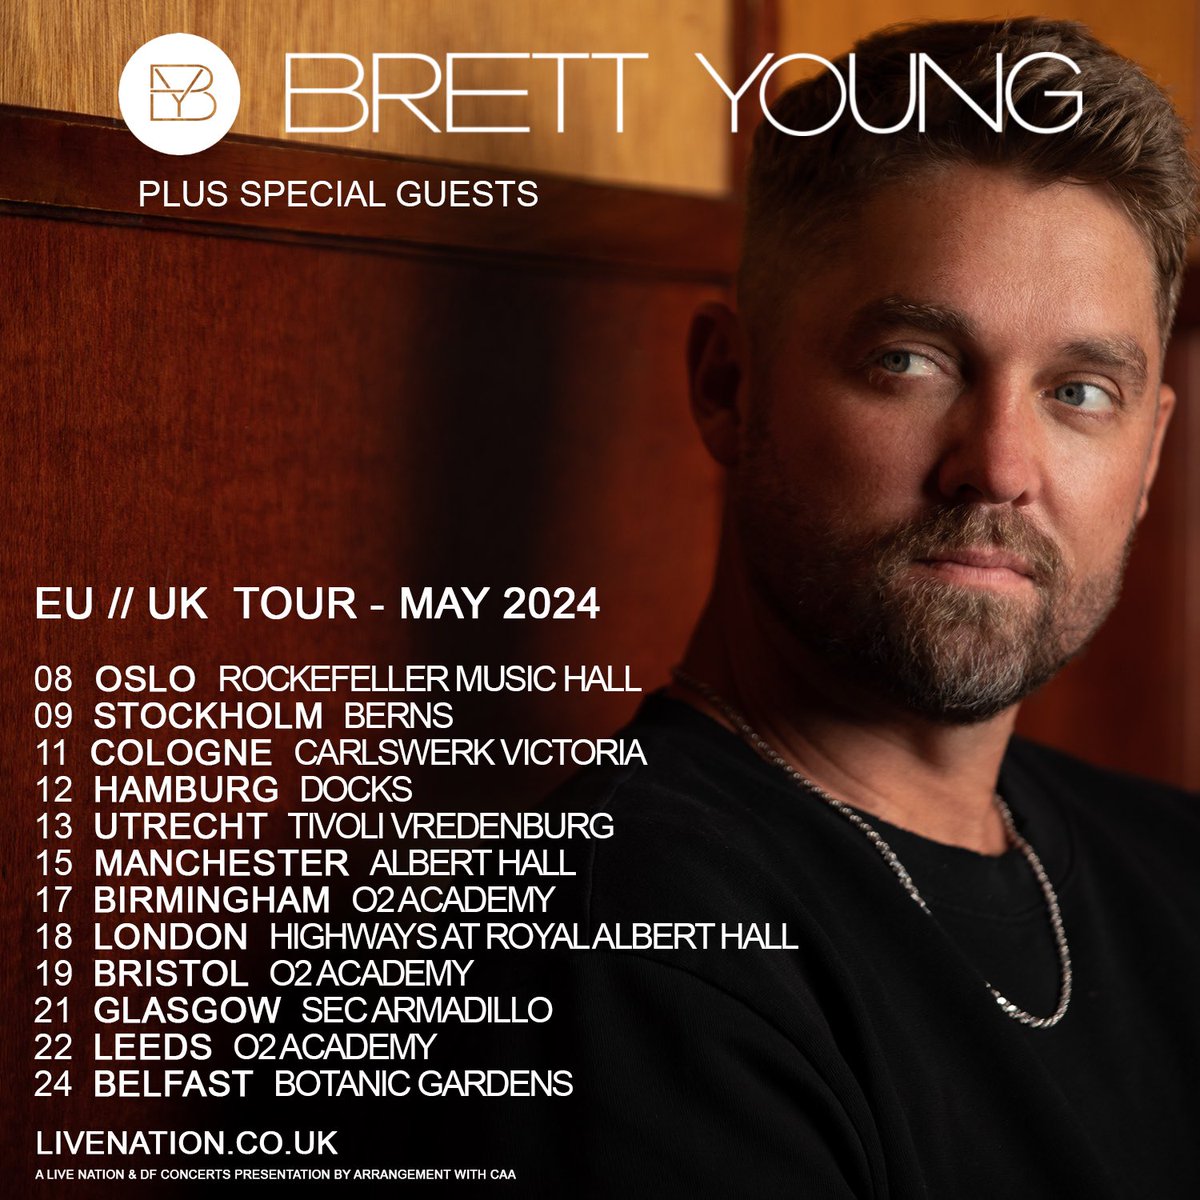 BrettYoungMusic tweet picture